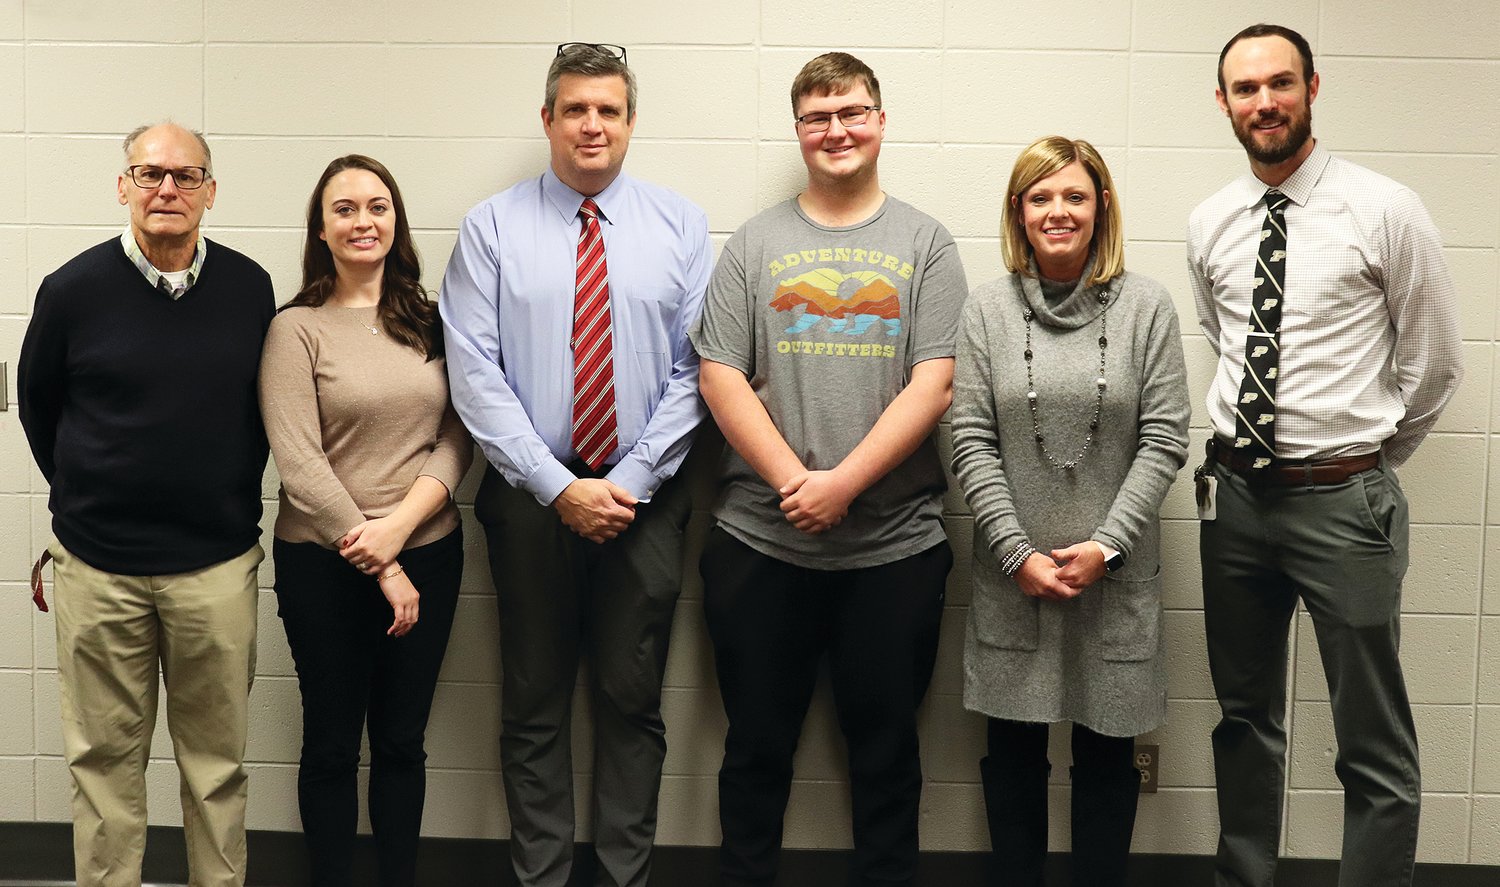 Southmont administration are, from left, Brad Acton, Kelsey Feese, Dr. Chad Cripe, Gabriel Little, Ashley Hammond and Kyle Owens.